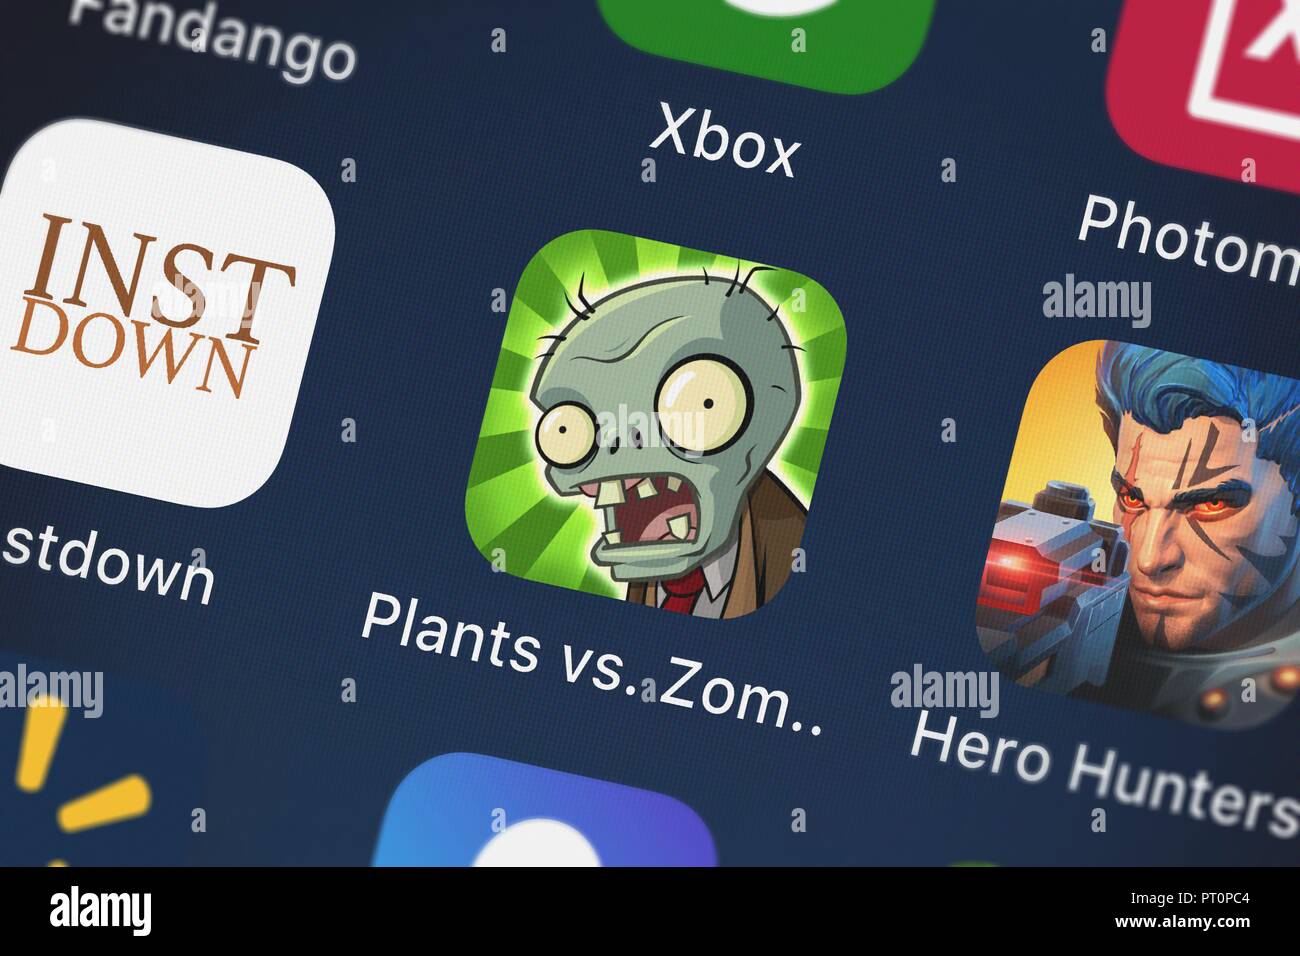 Plants vs. Zombies™ HD on the App Store